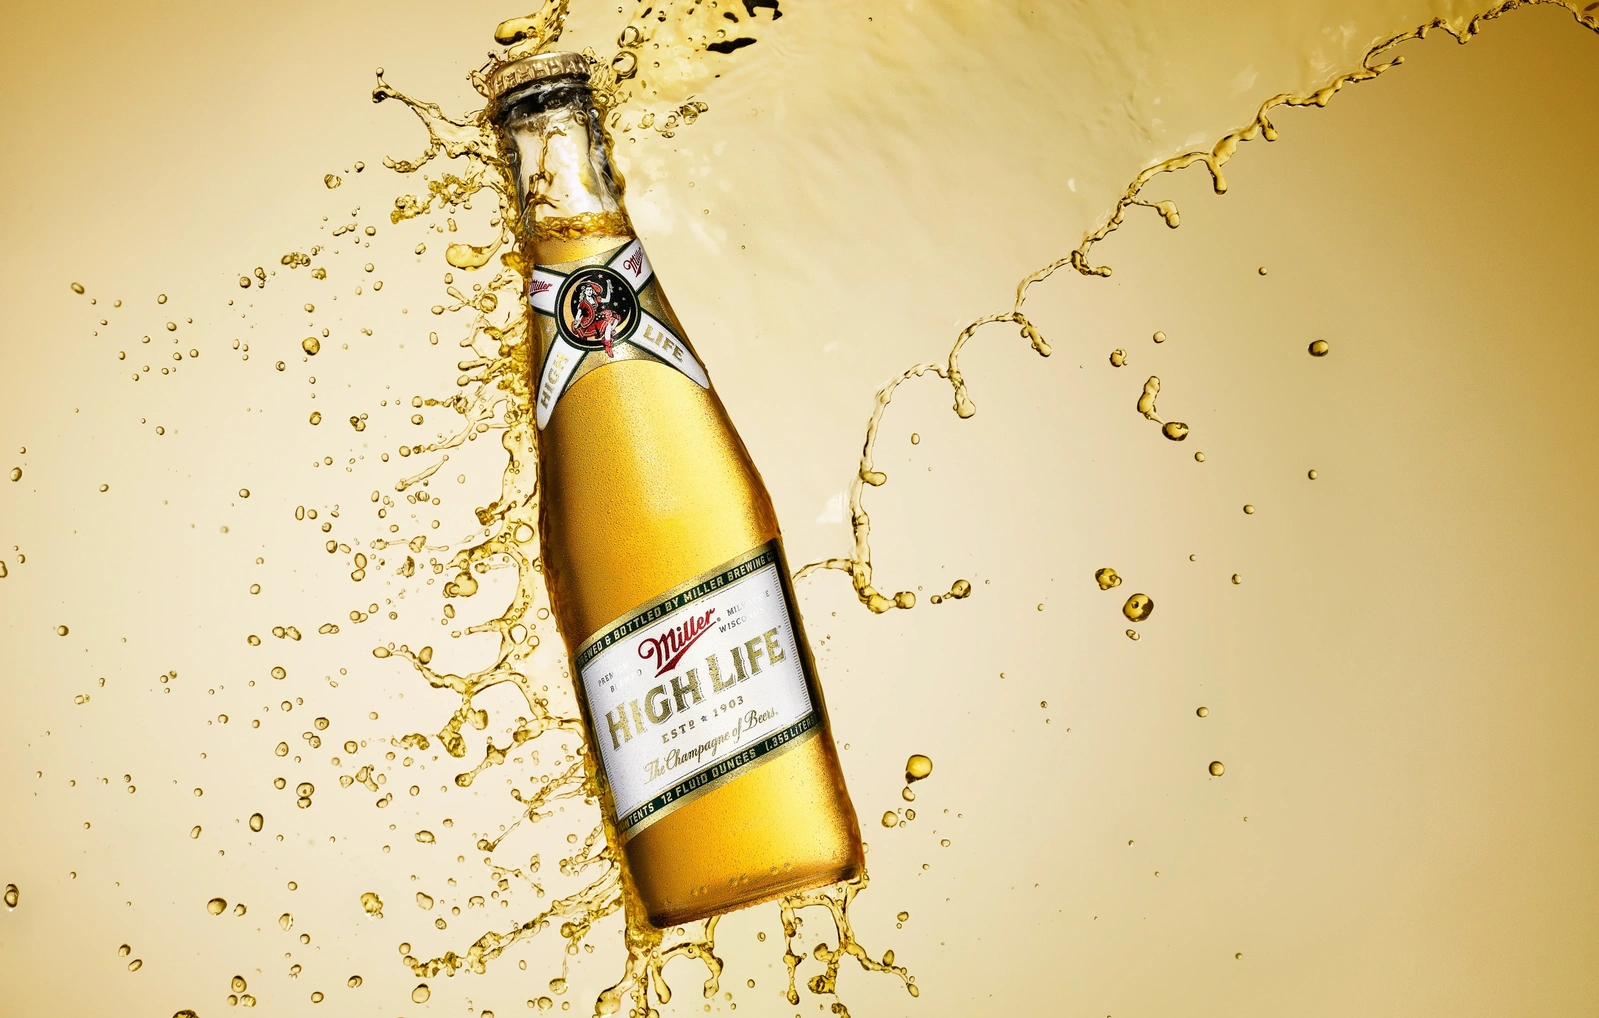 Beverage, wine and liquor product photography by Timothy Hogan in Los Angeles